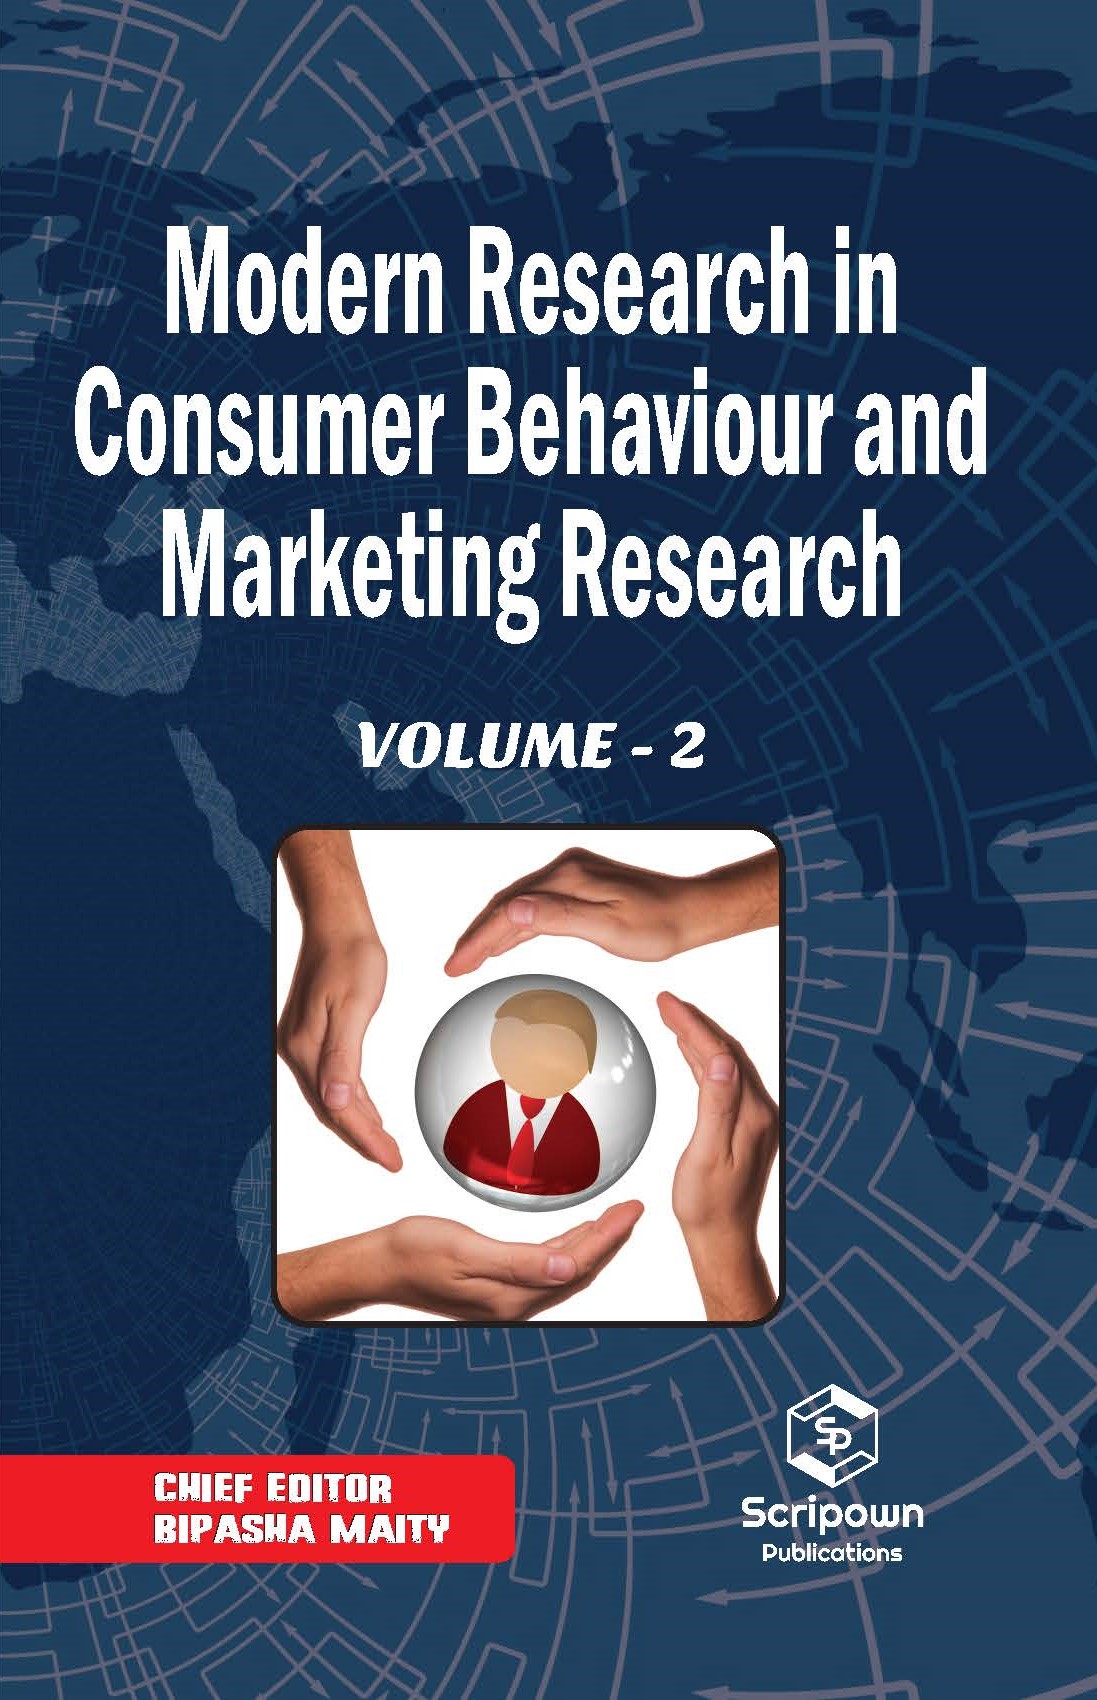 Modern Research in Consumer Behaviour and Marketing Research (Volume - 2)